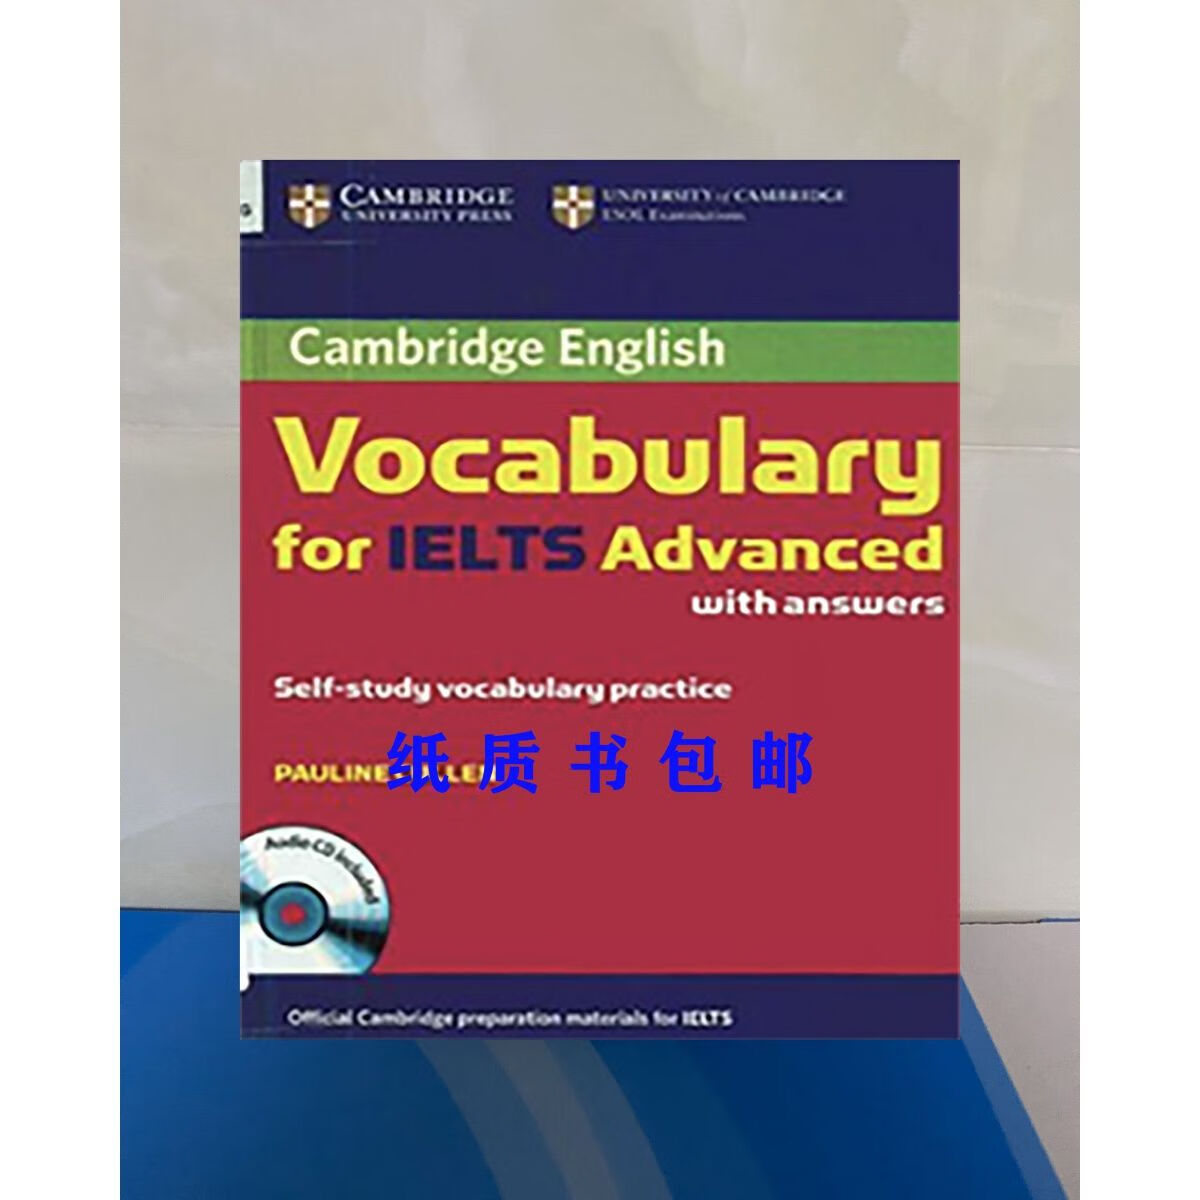 Cambridge Vocabulary for IELTS Advanced with answers